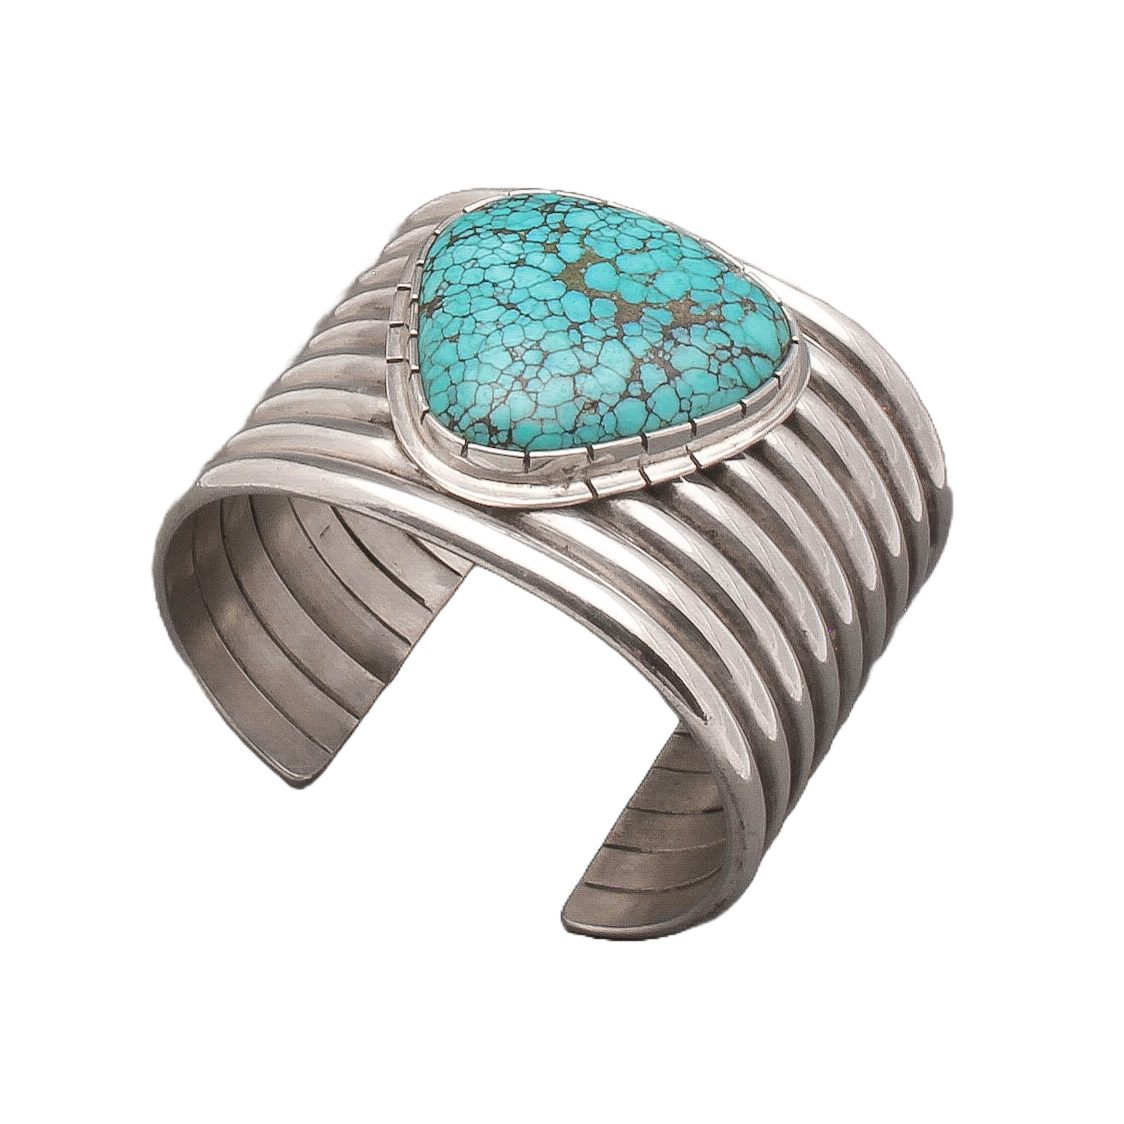 Mike Bird Romero Bracelet of Silver and Turquoise